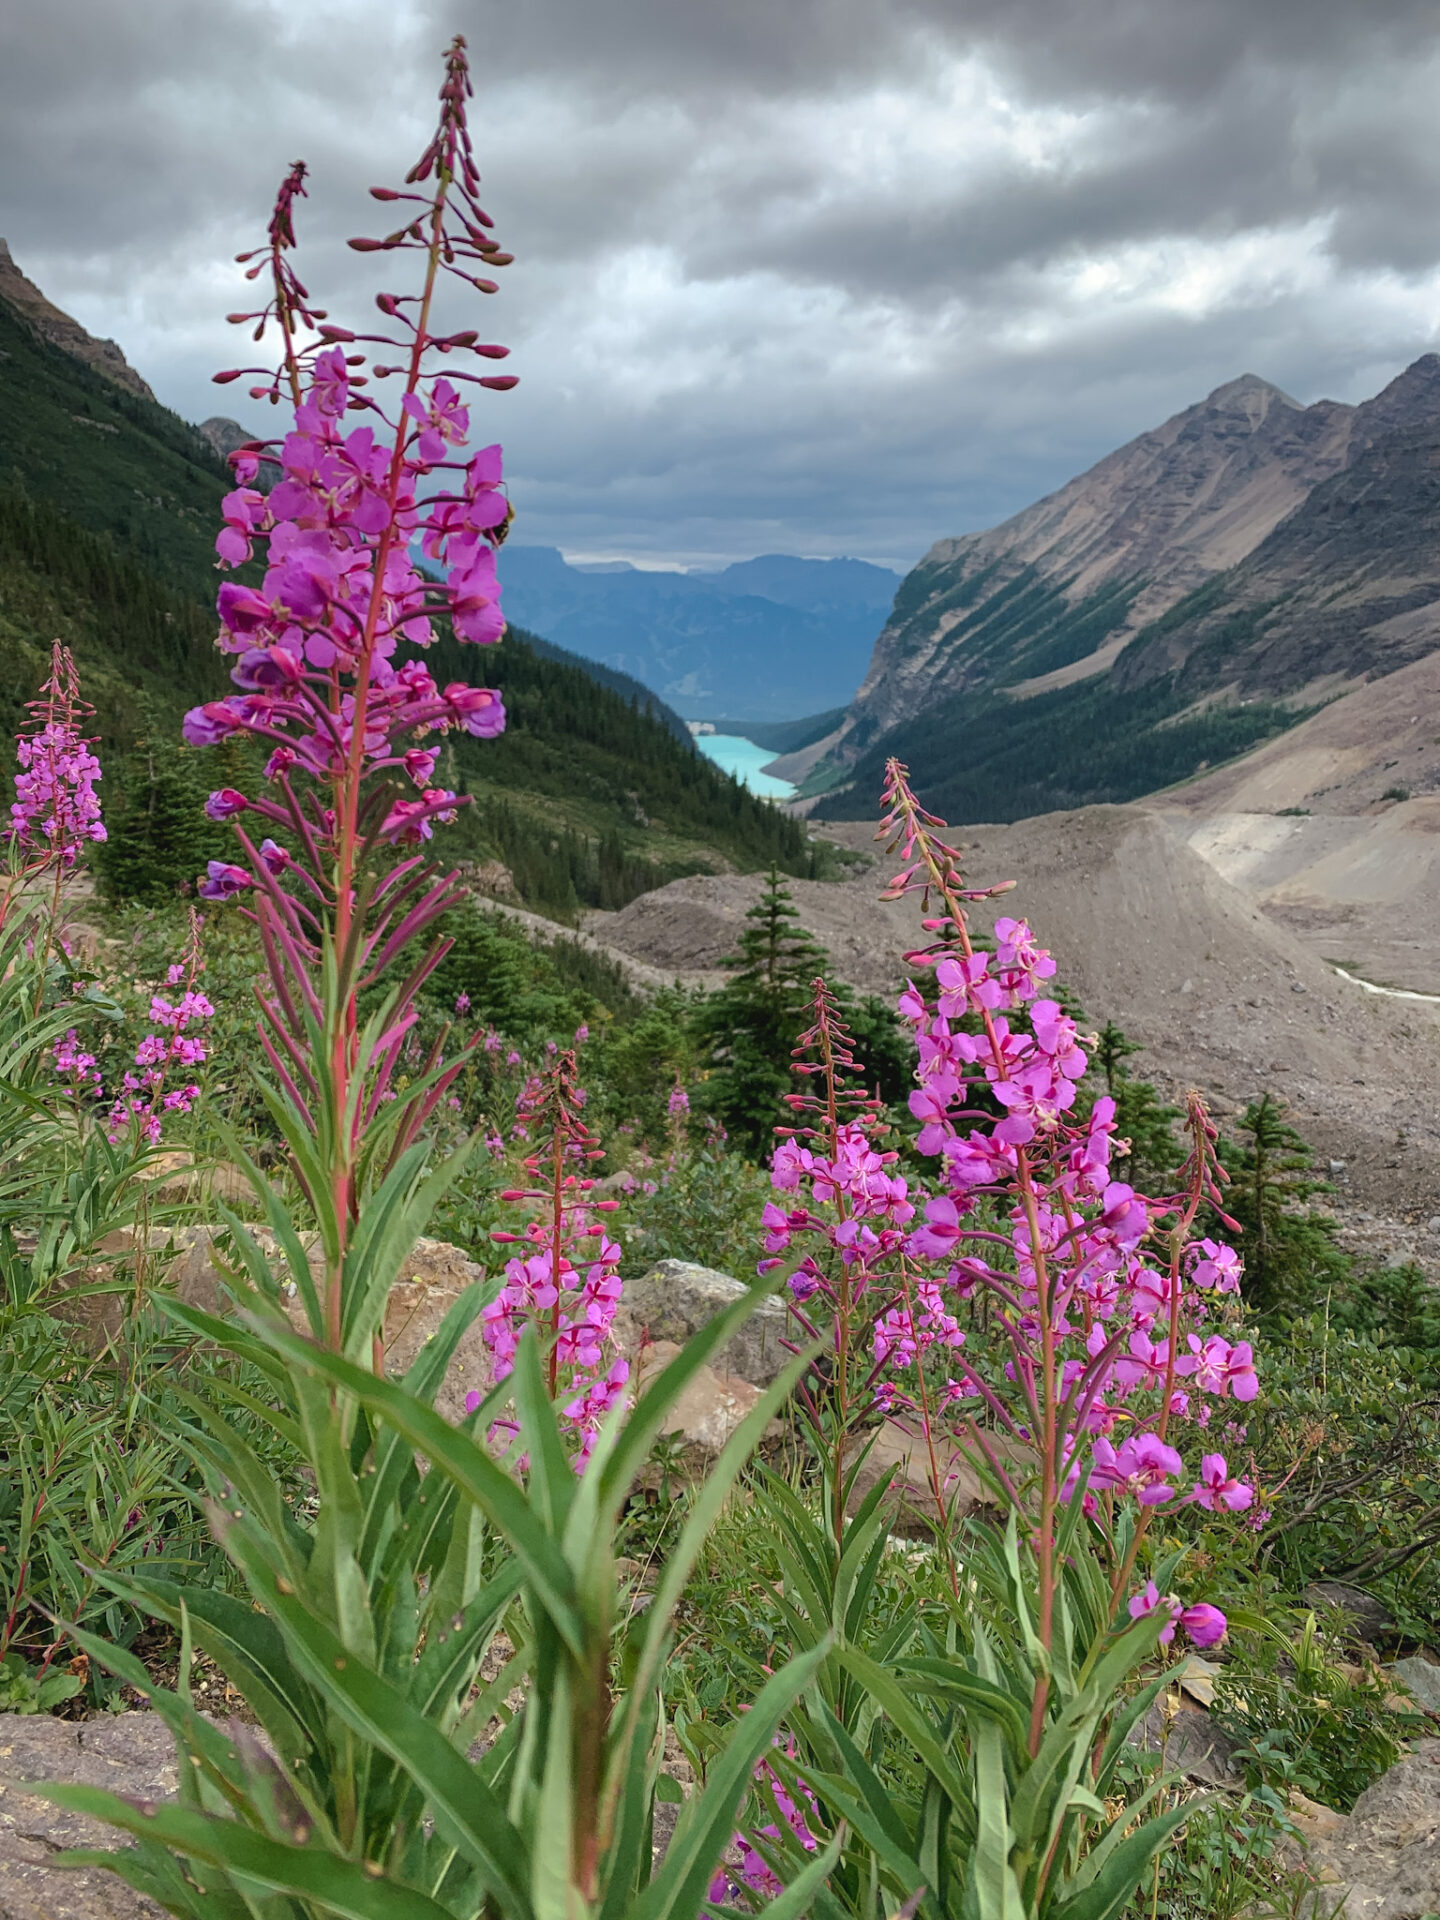 Wildflowers along the Plain of the Six Glaciers hiking trail in Lake Louise, Alberta